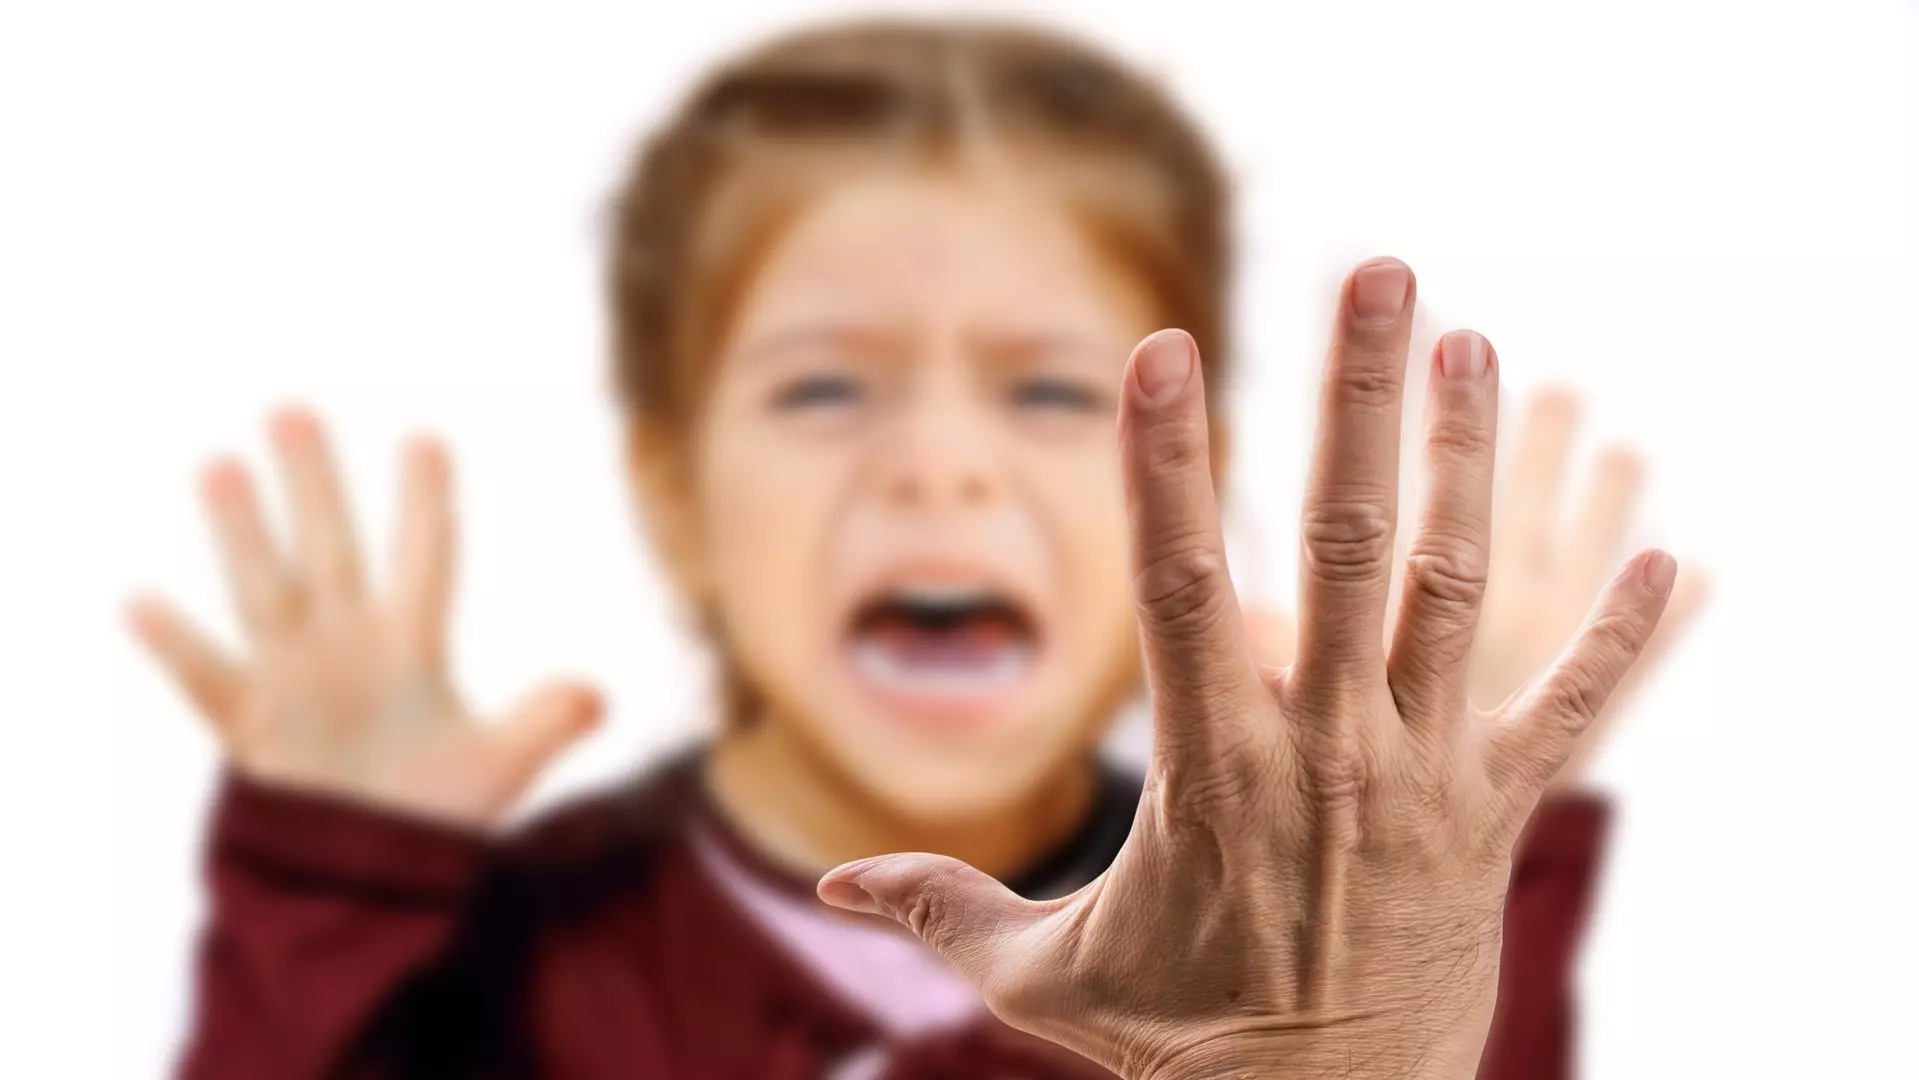 Smacking Your Child Can Affect Their Brain Development, Study Says